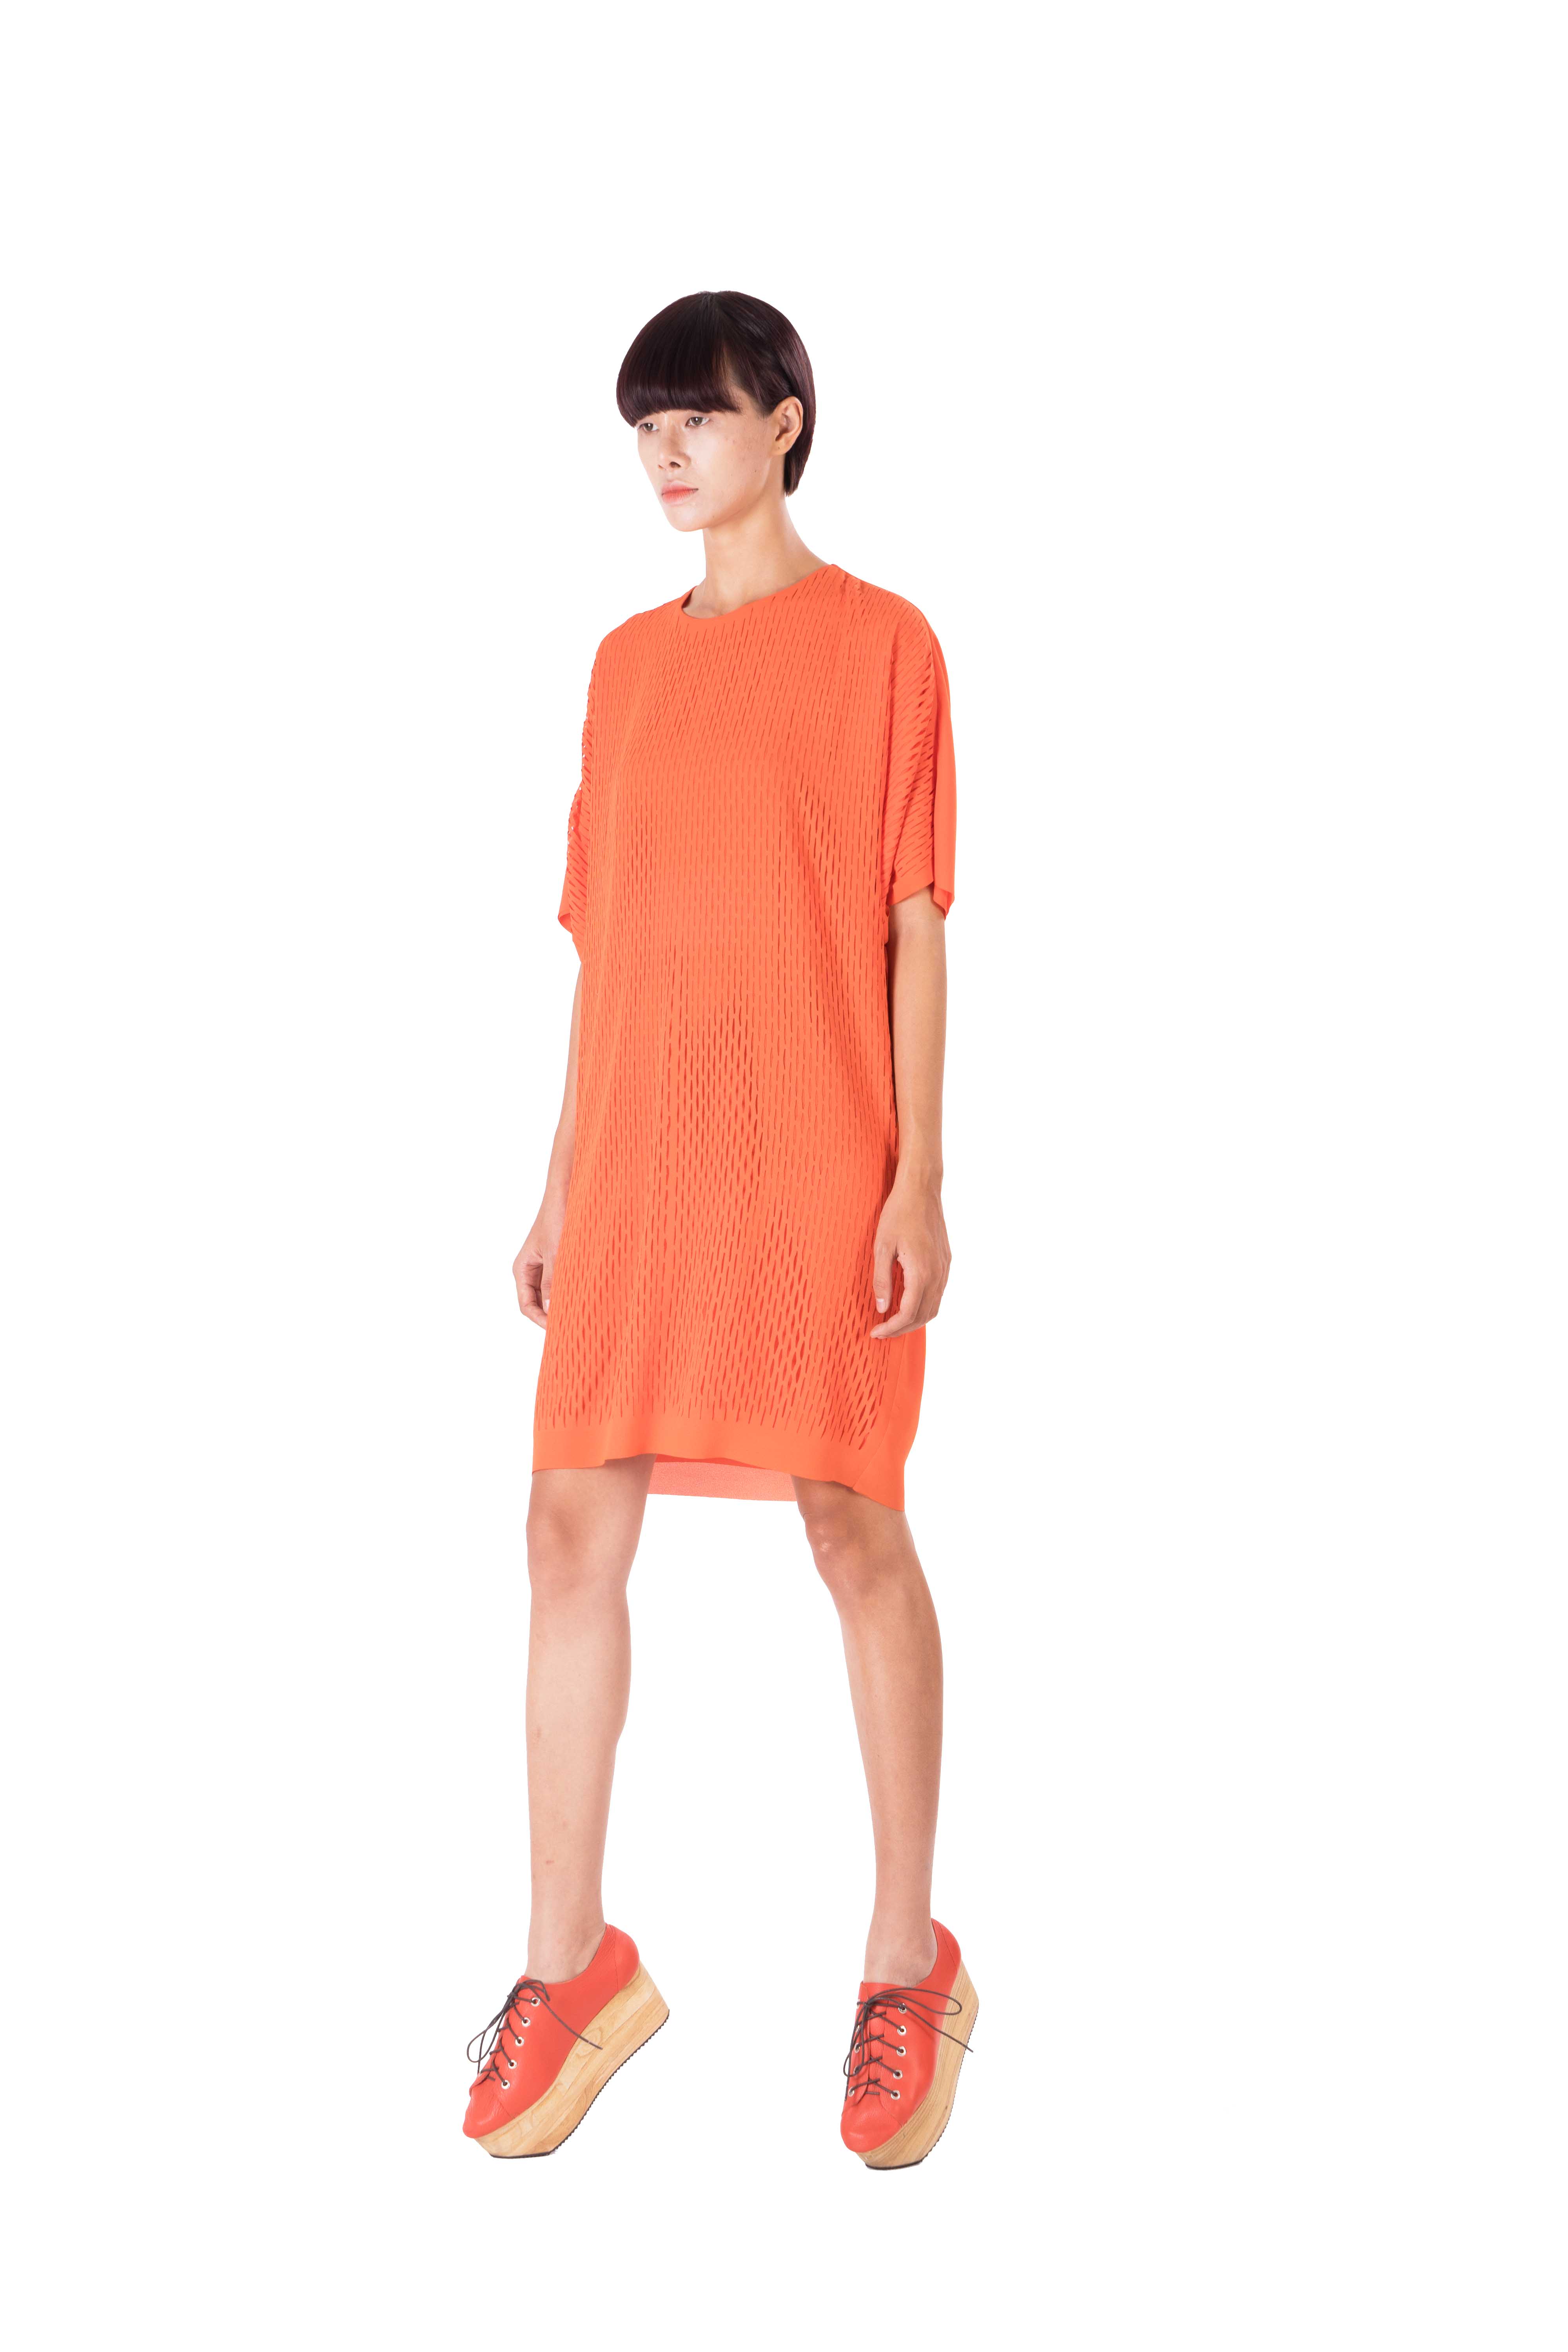 Orange dress with kimono style sleeves with laser cut out detailing in front